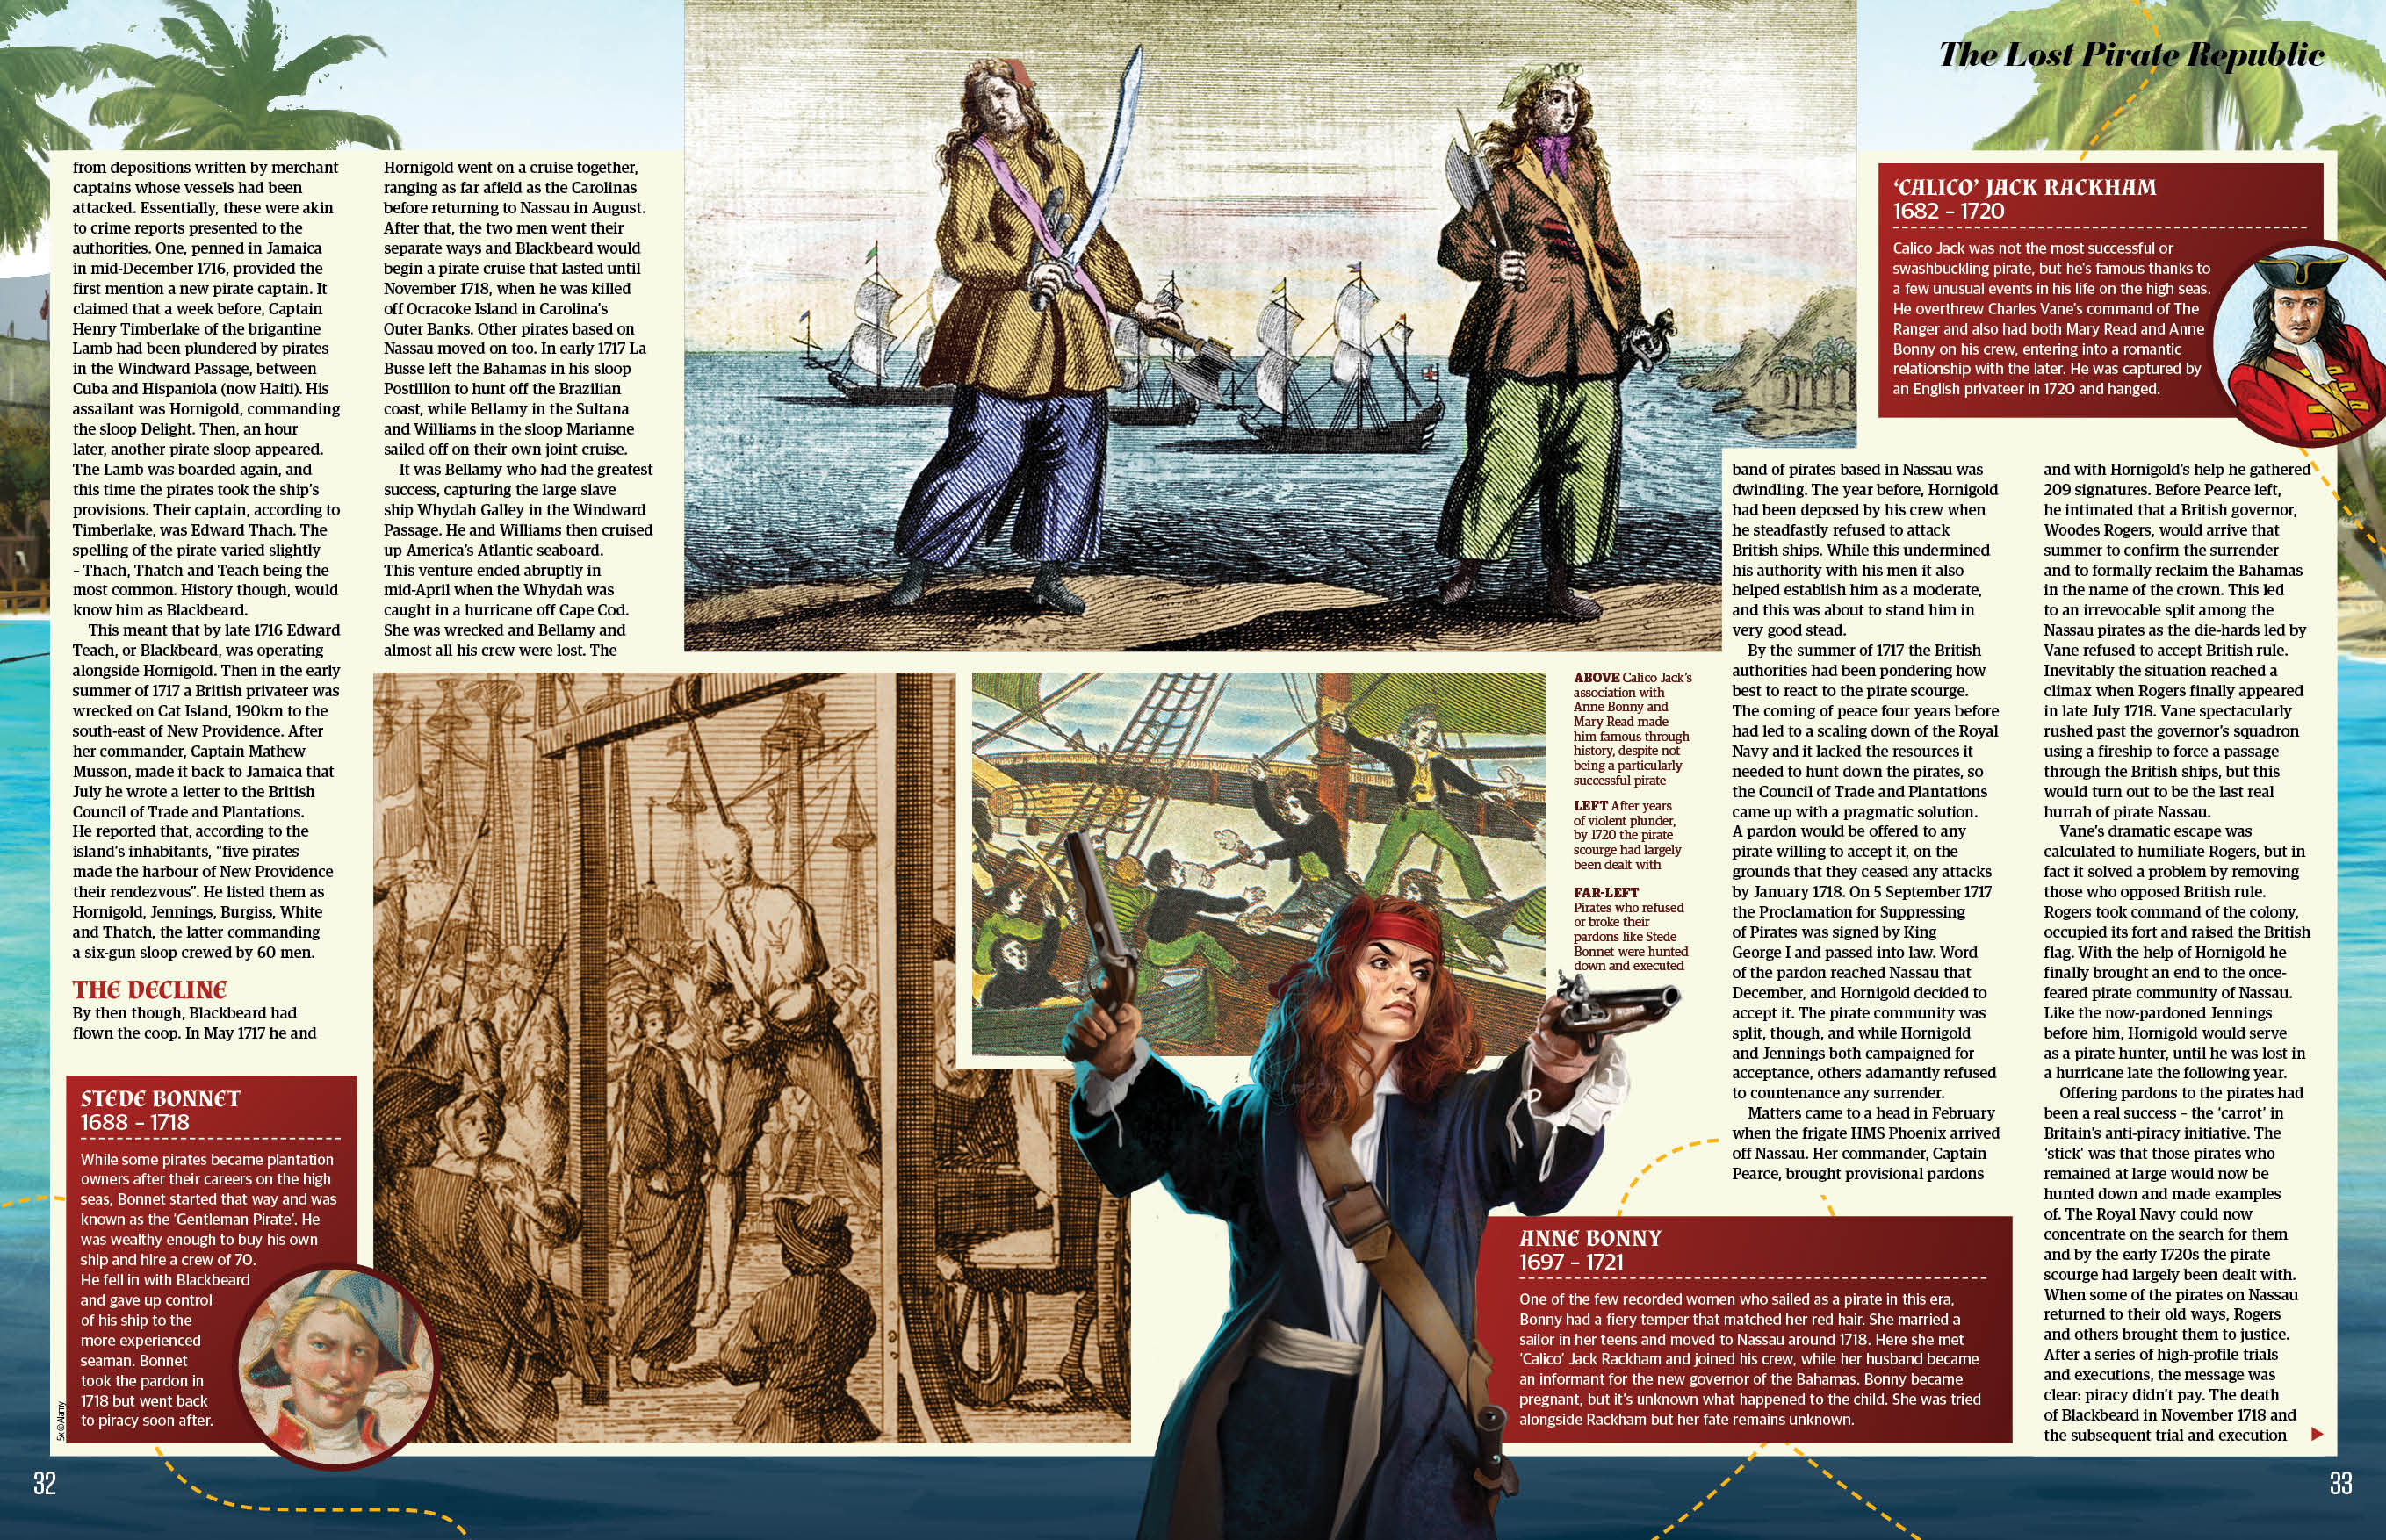 Lost Pirate Republic feature spread, AAH 116